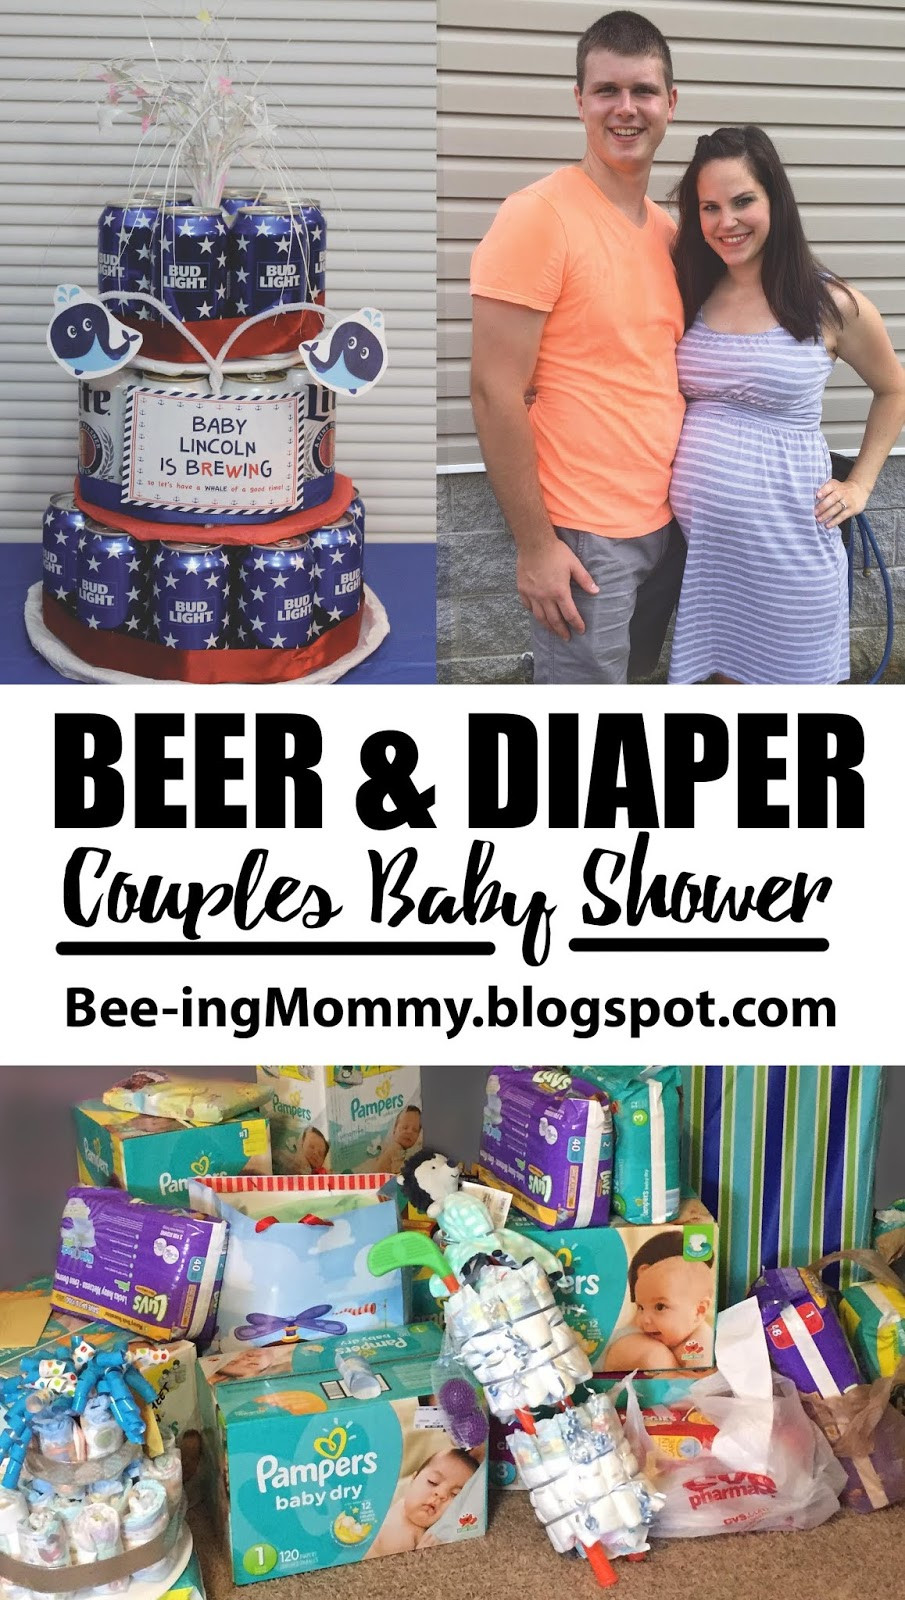 Baby Shower Diaper Party
 Couples Baby Shower Diaper & Beer Party